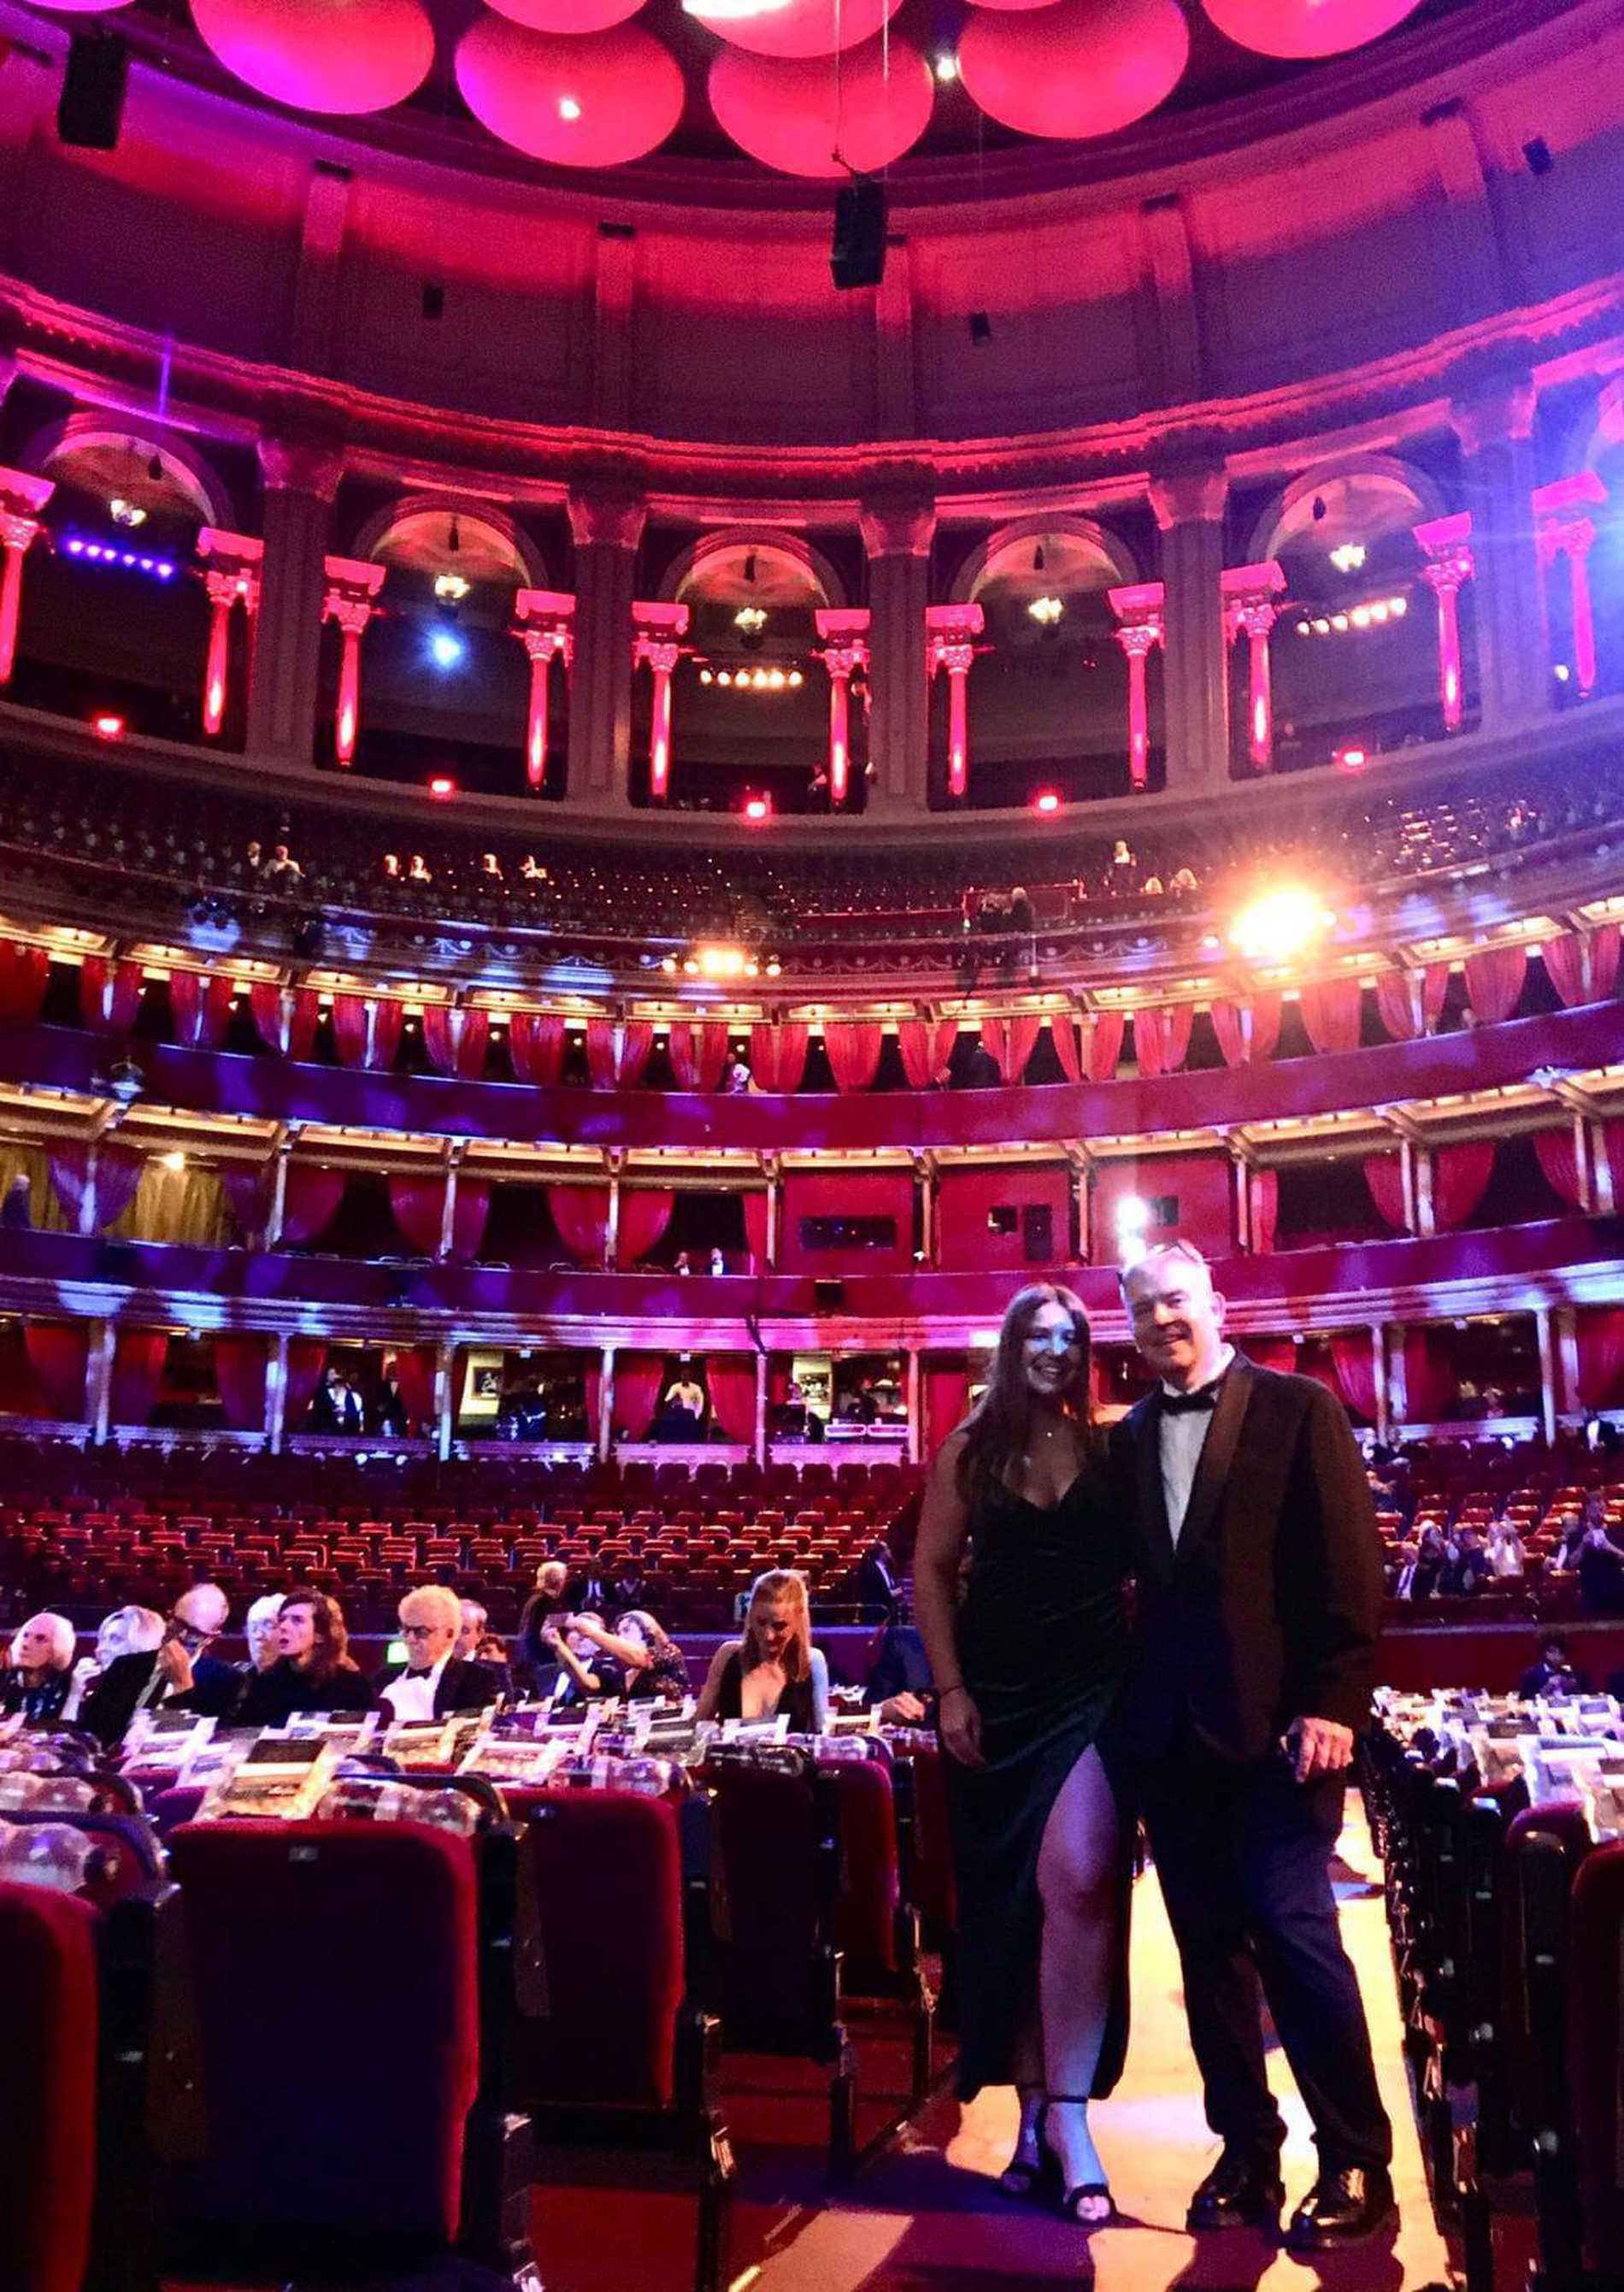 Chloe and her dad inside the Royal Albert Hall.